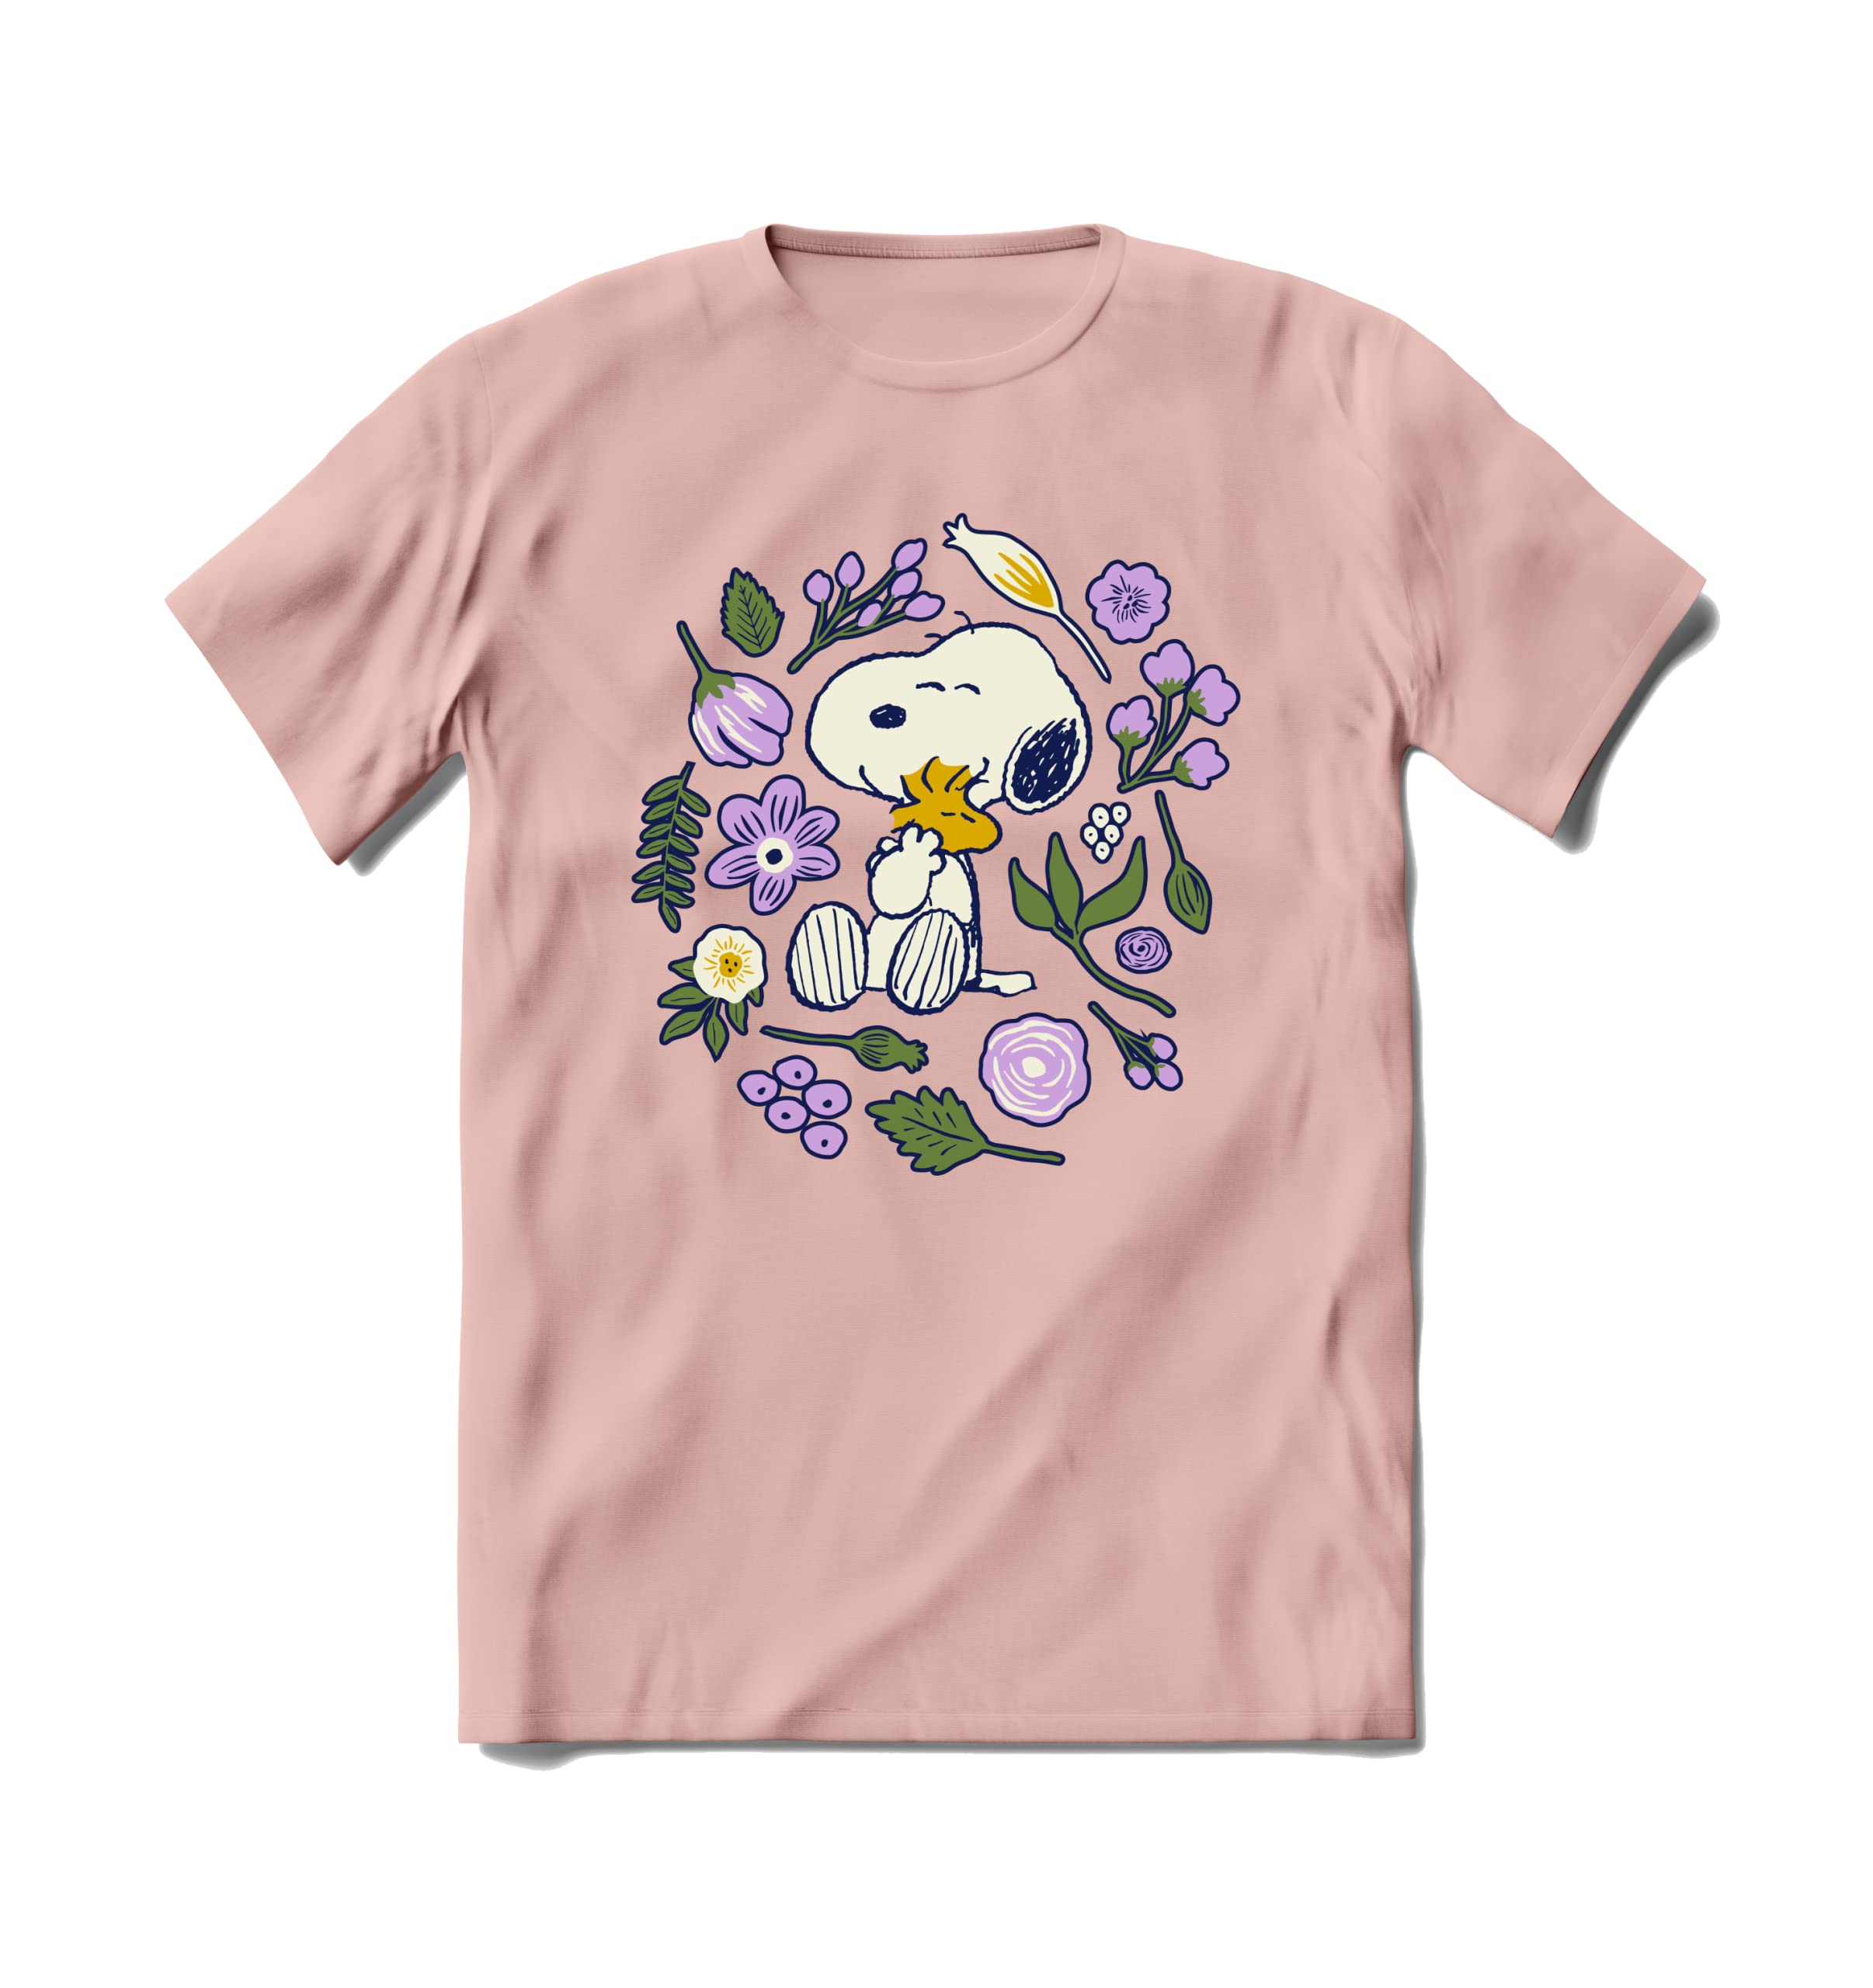 BRIEF INSANITY Peanuts Snoopy Floral Love Unisex Short Sleeve T-Shirt